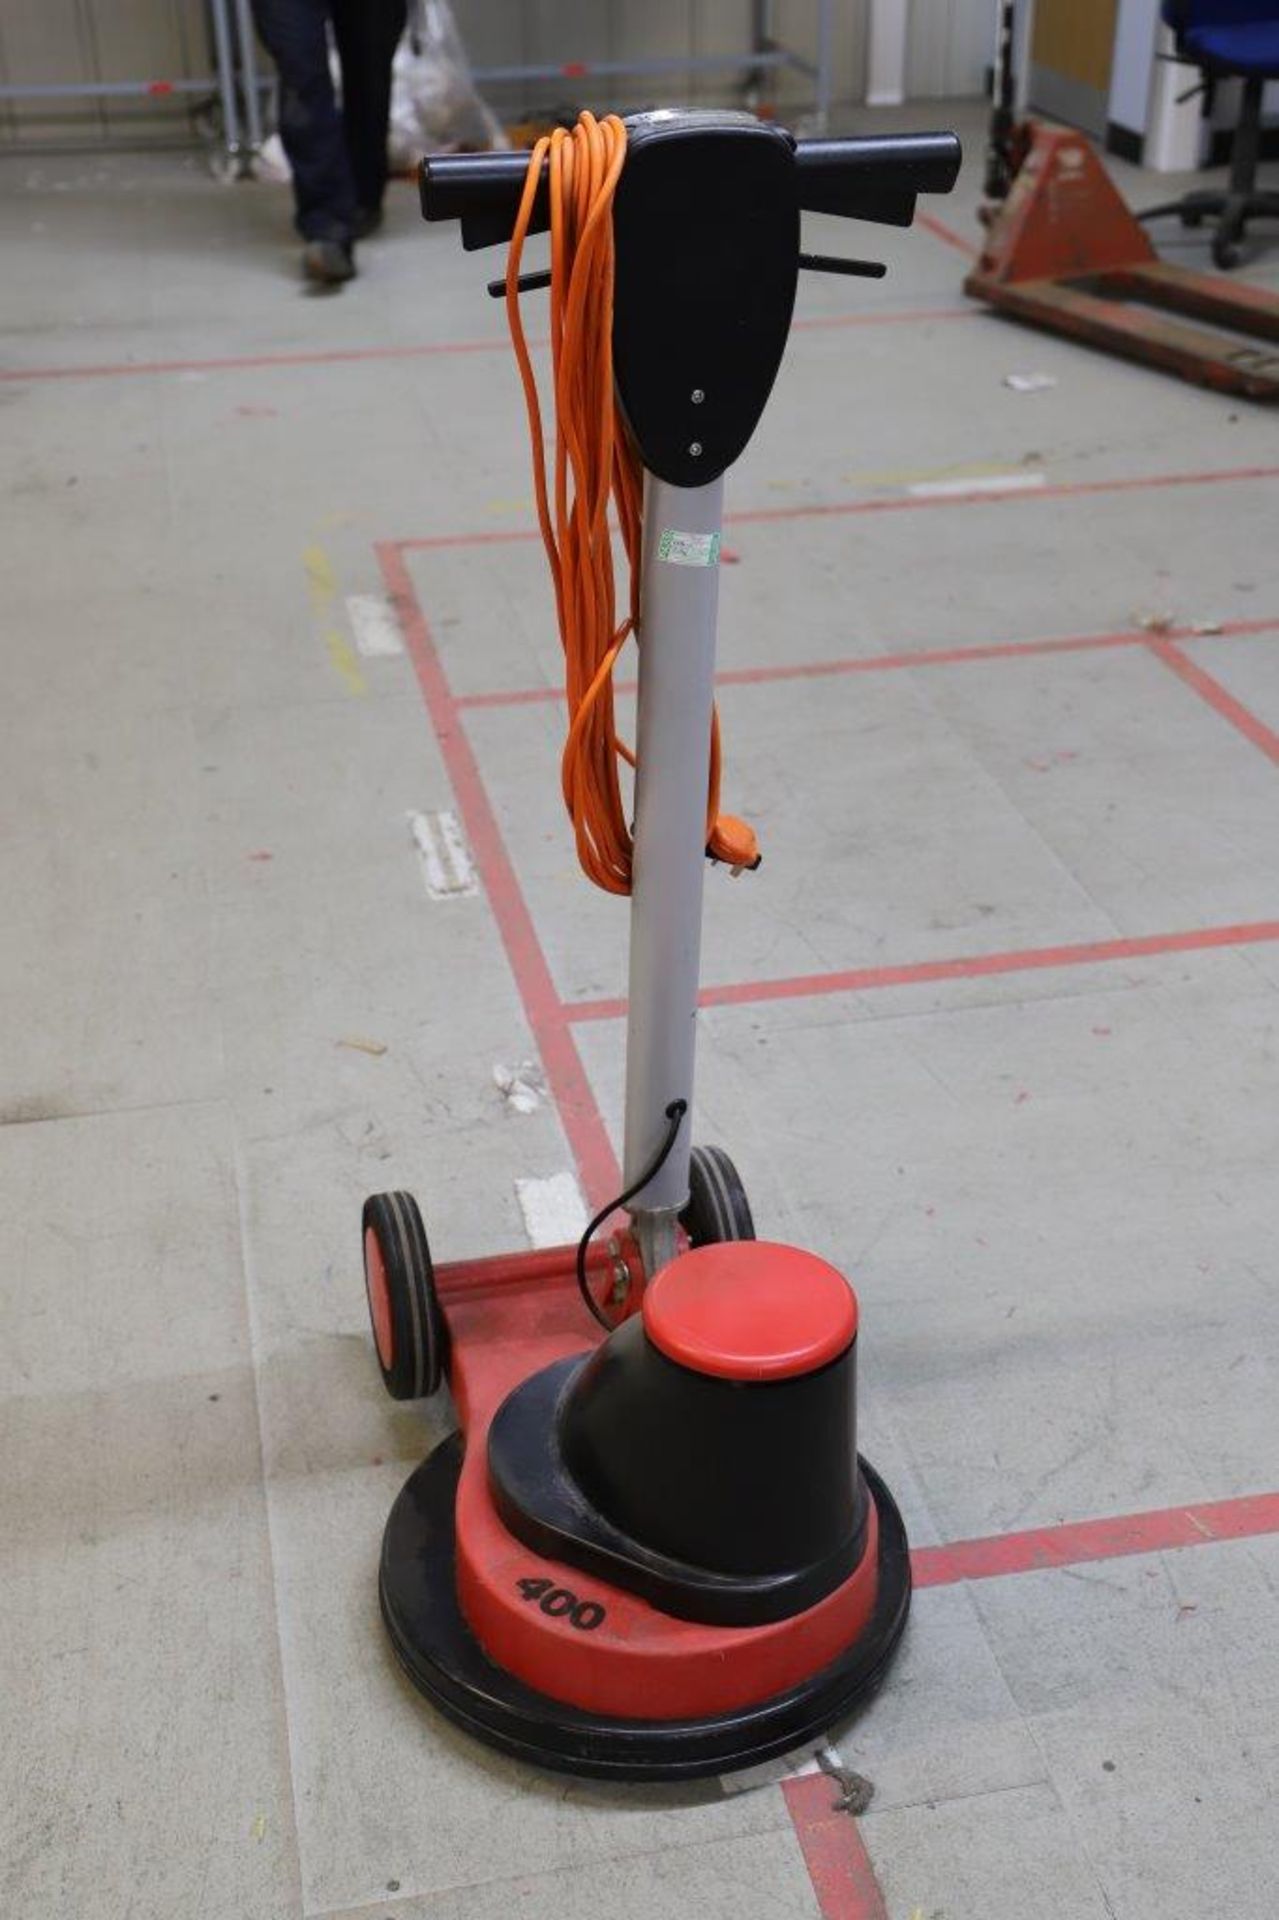 PAT tested Industrial cleaning machines, includes: HV380 BUFFER, TRUVOX. - Image 3 of 4